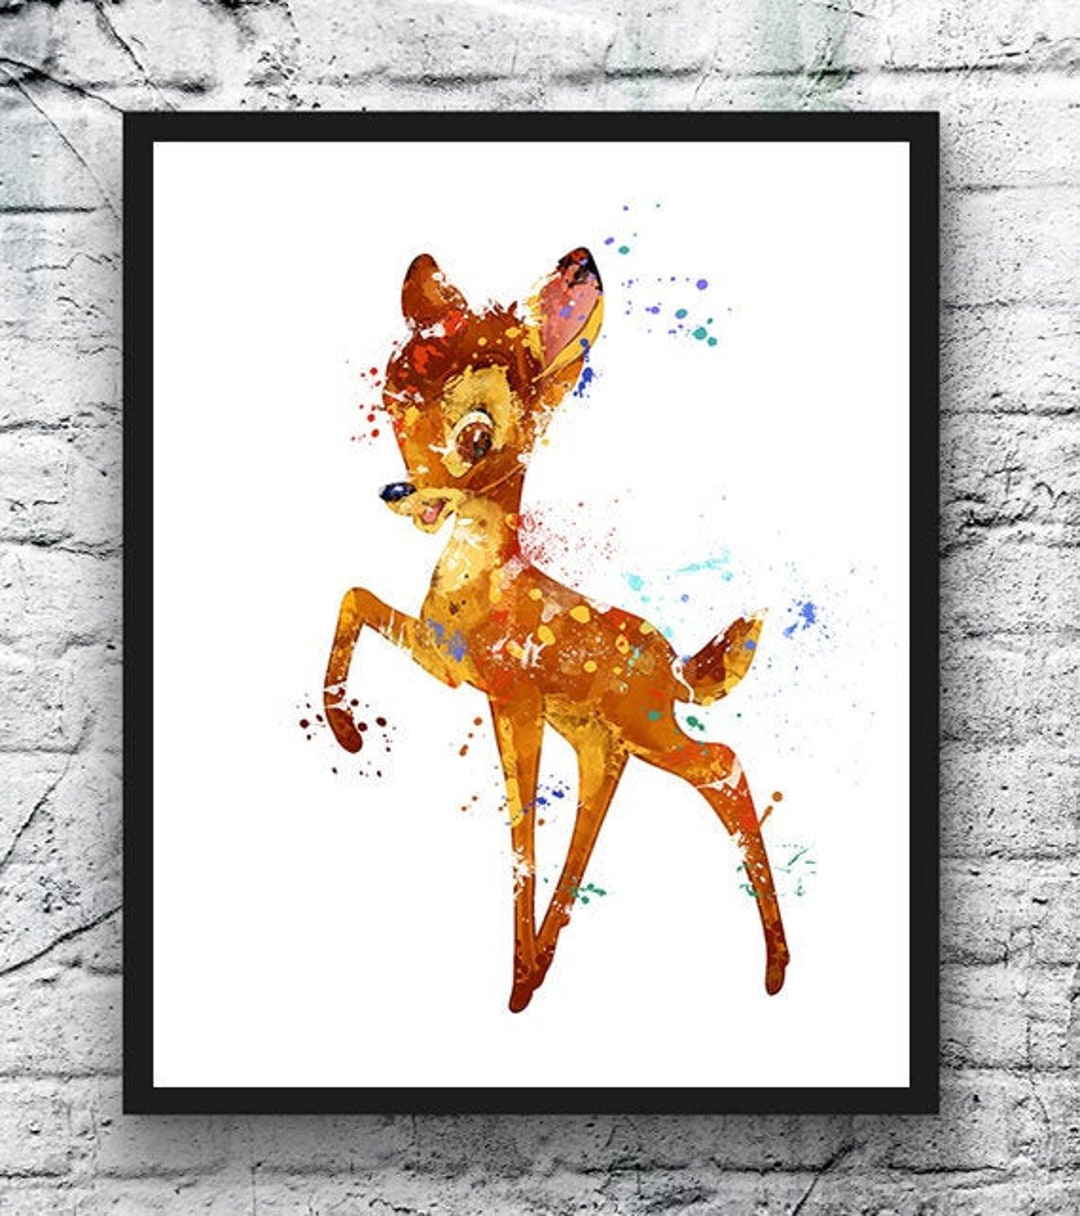 Aesthetic Bambi Disney Paint By Numbers